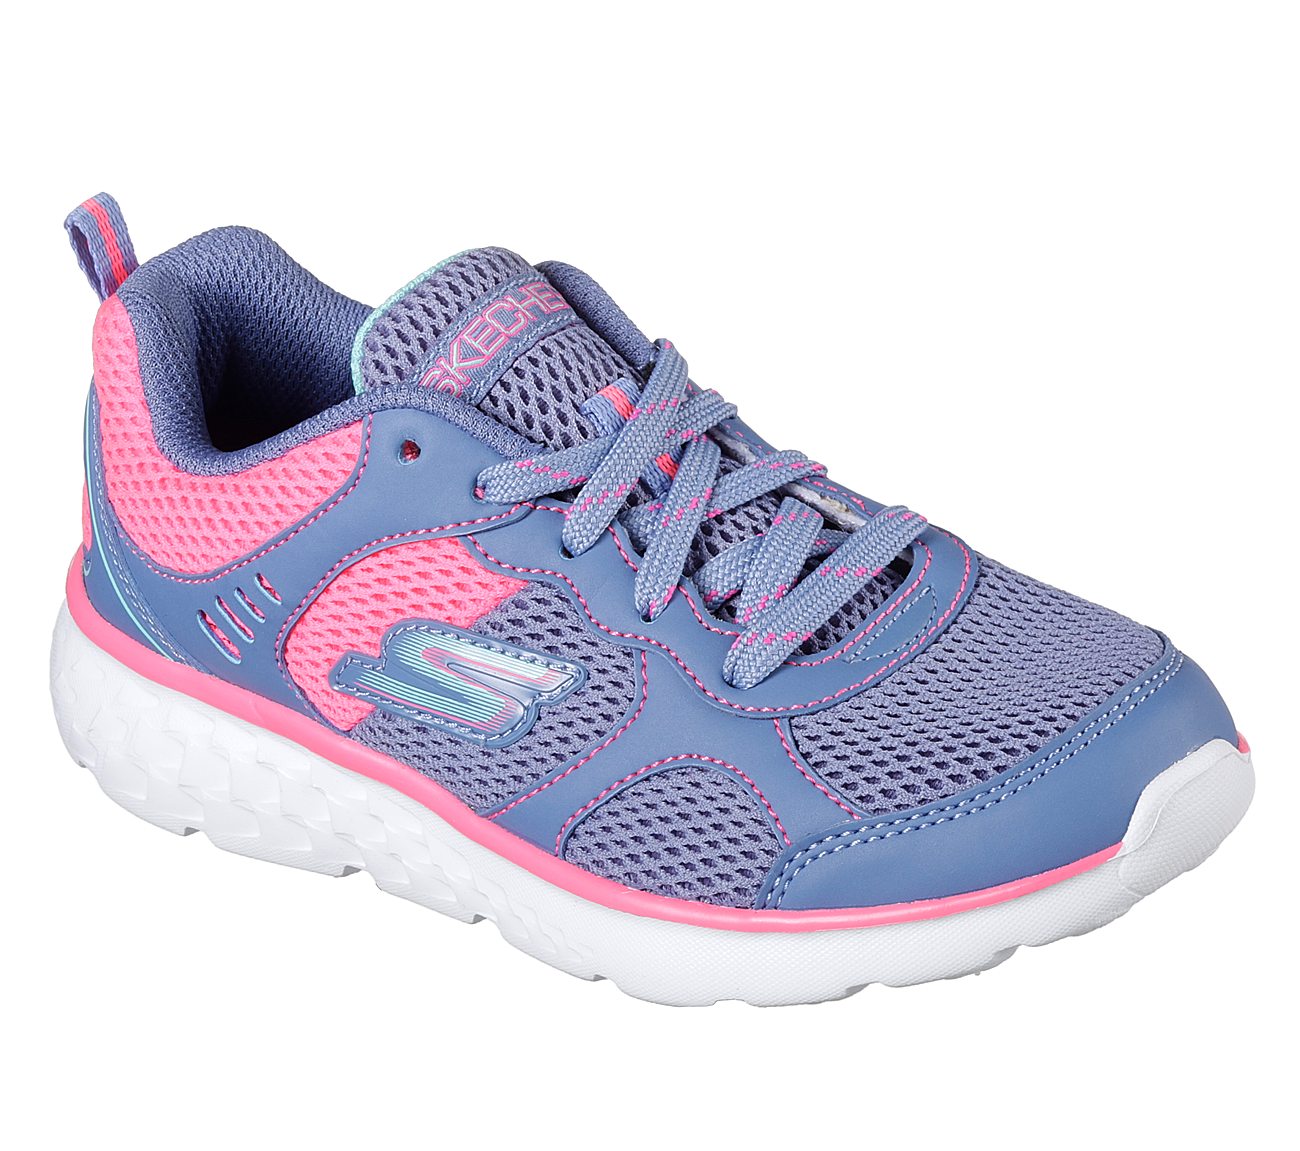 GO RUN 400, BLUE/NEON PINK Footwear Lateral View